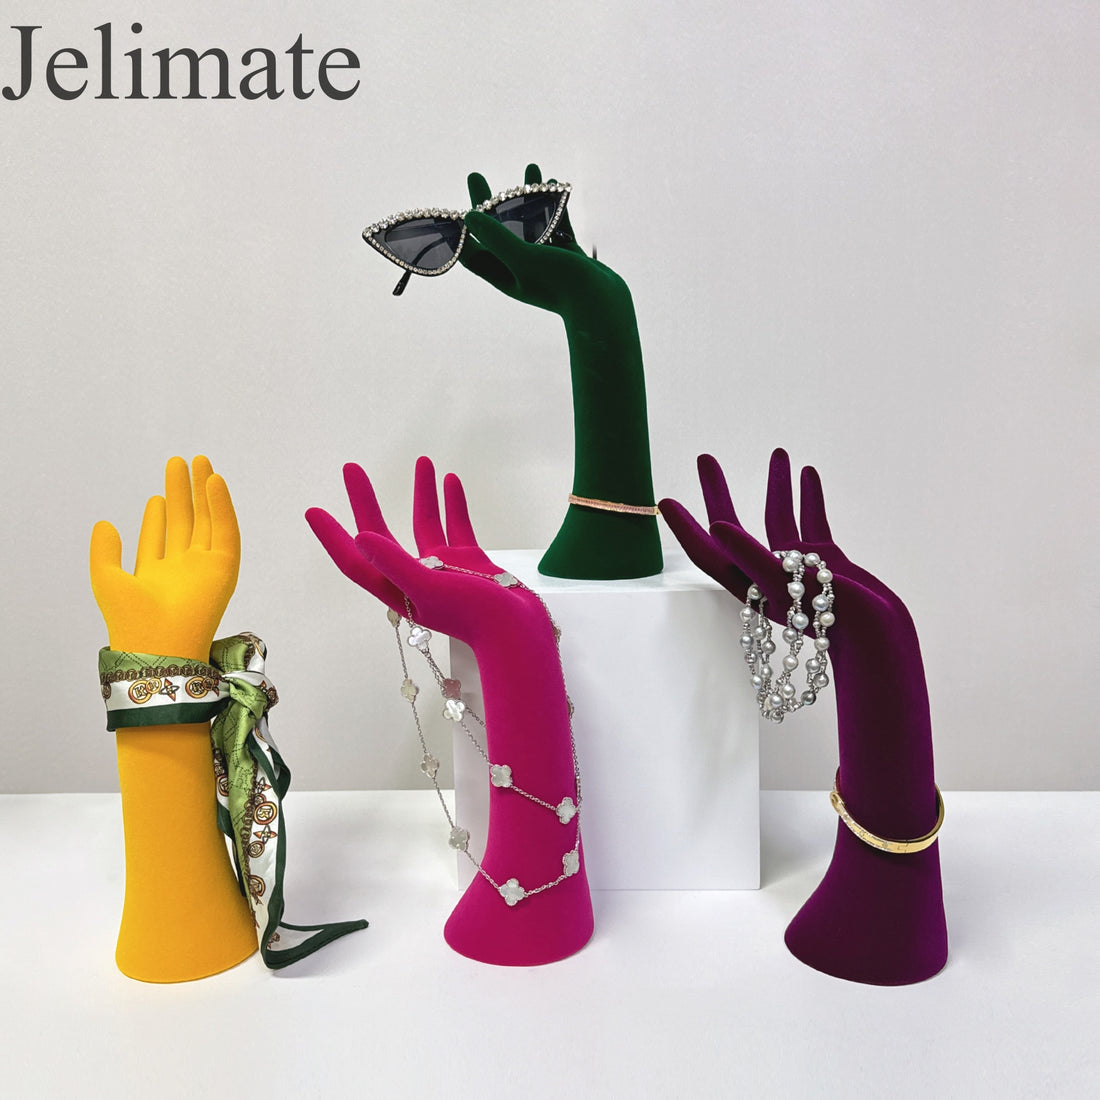 Transform Your Jewelry Store Display with Jelimate Luxurious Velvet Mannequin Hand